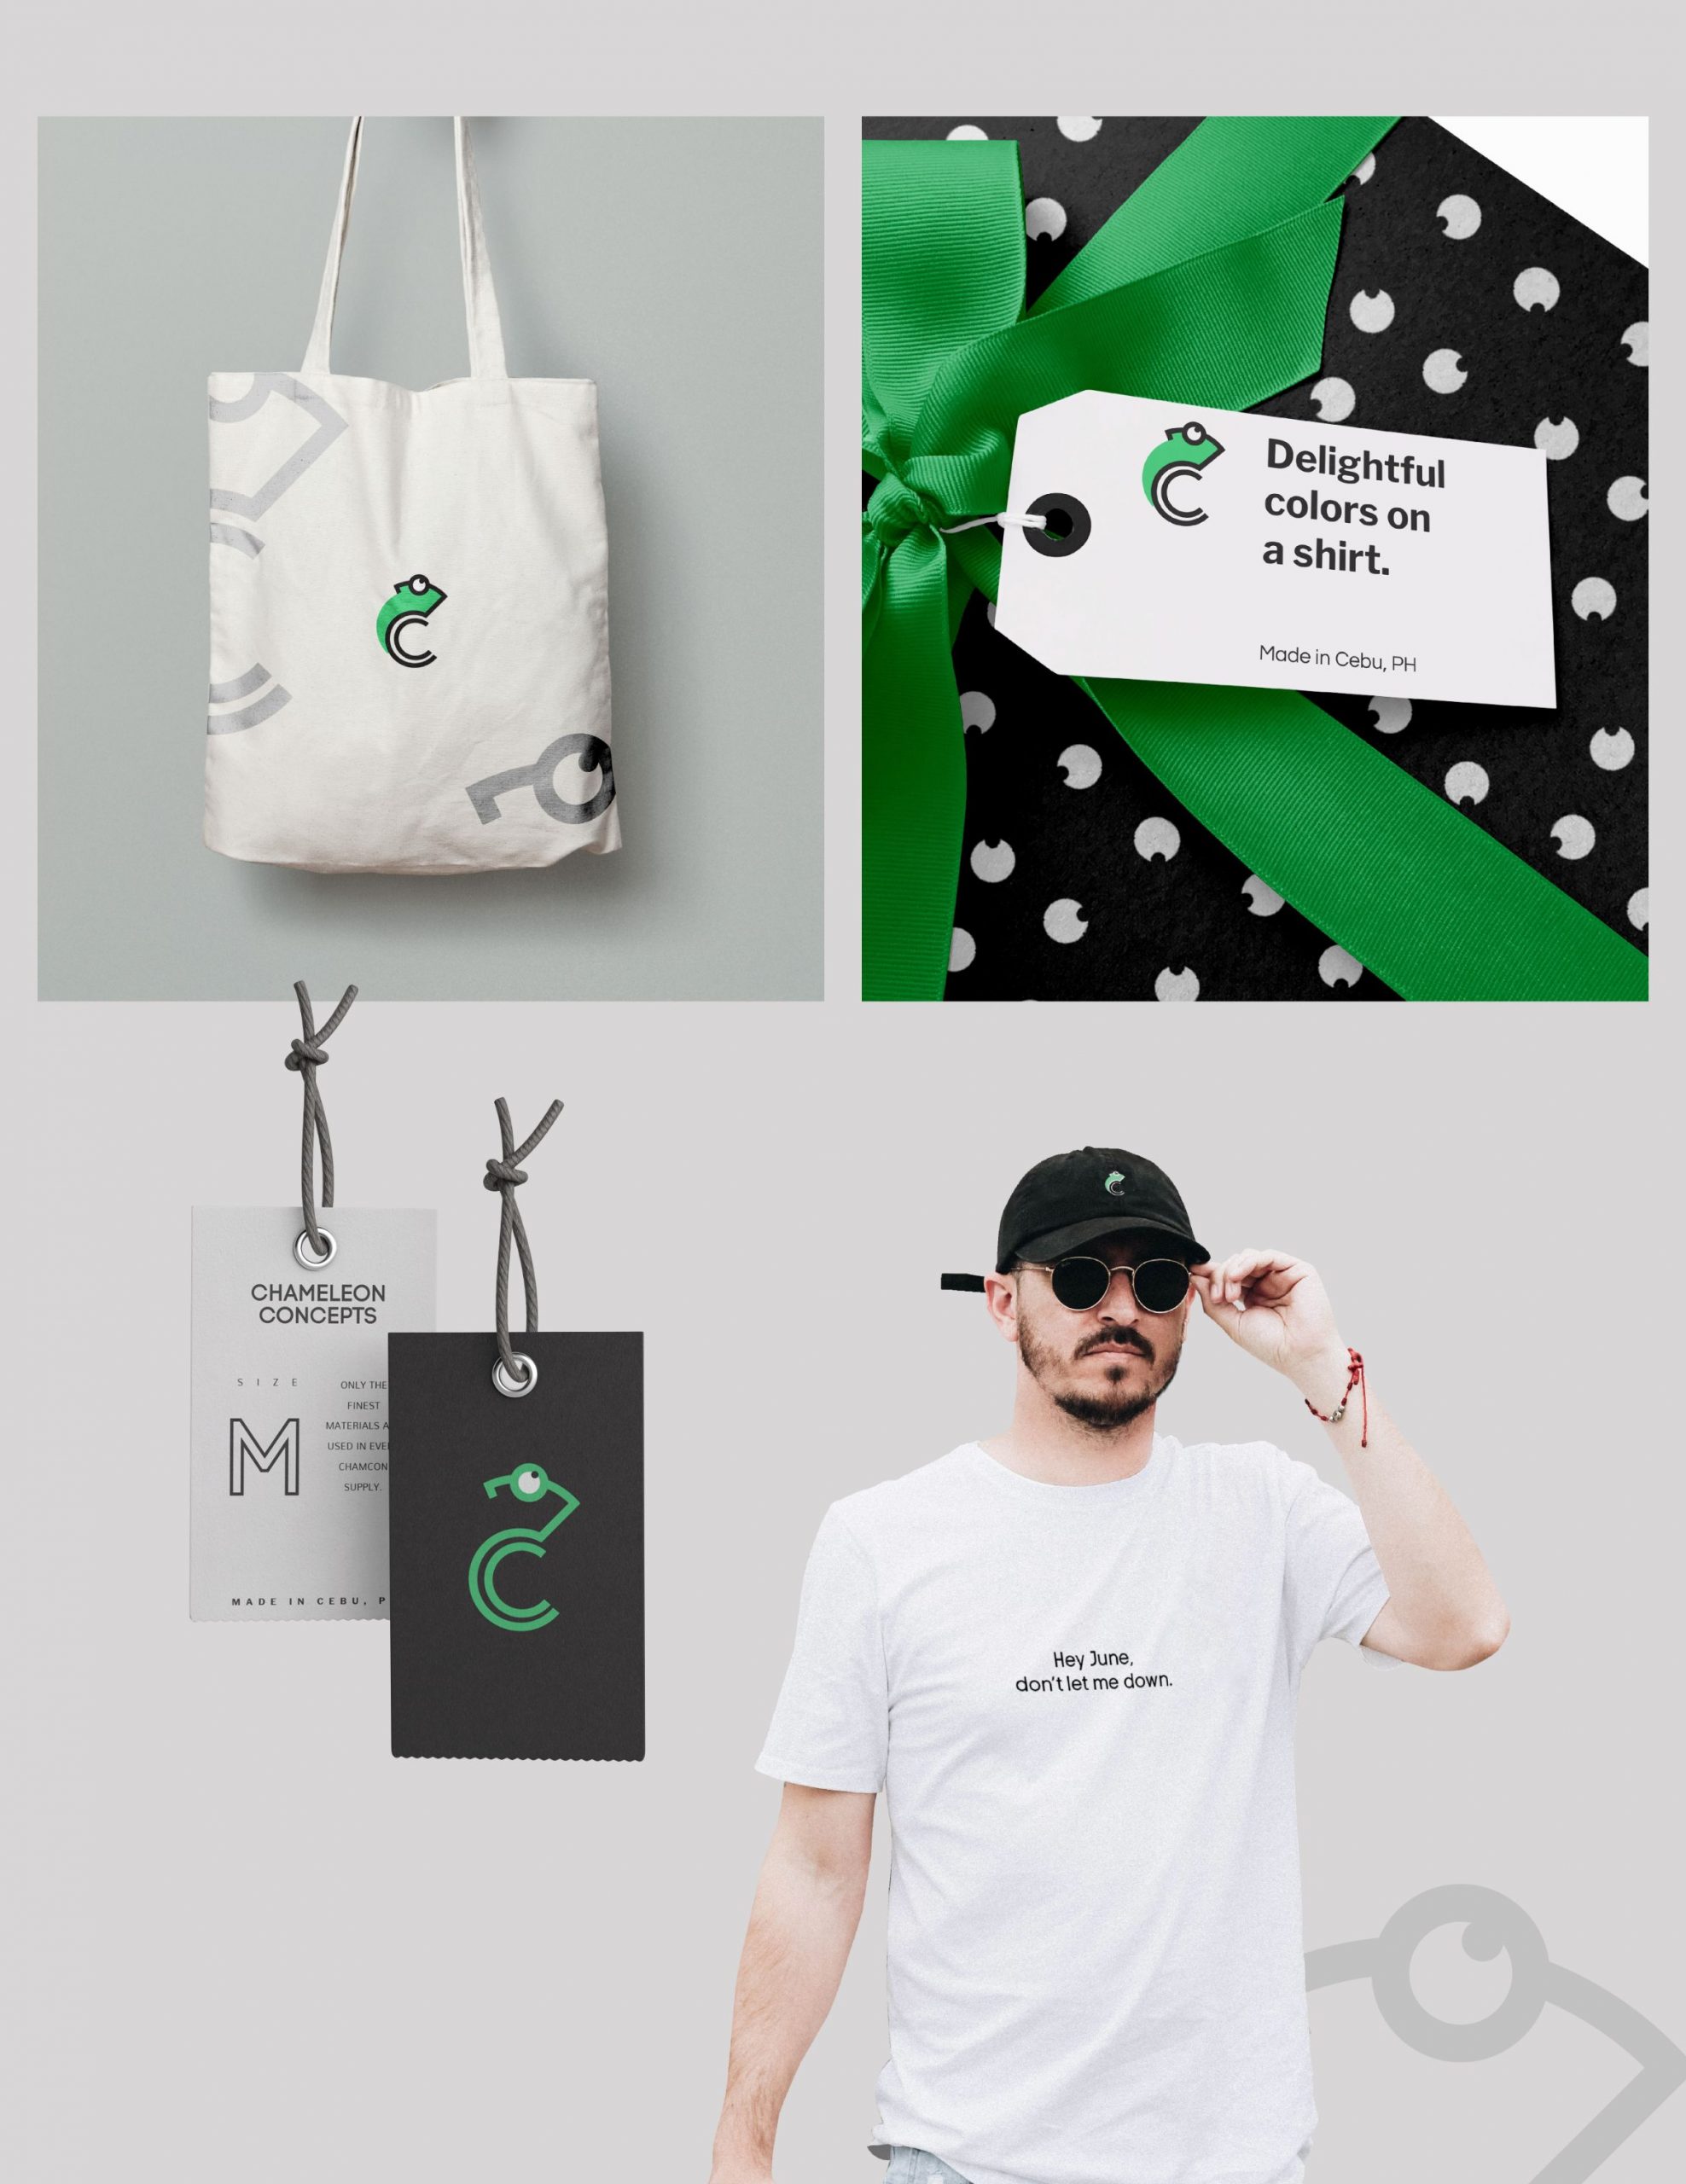 An image of a tote bag, invitation and wrapping paper, hang tags and a man wearing a white shirt with a logo on it